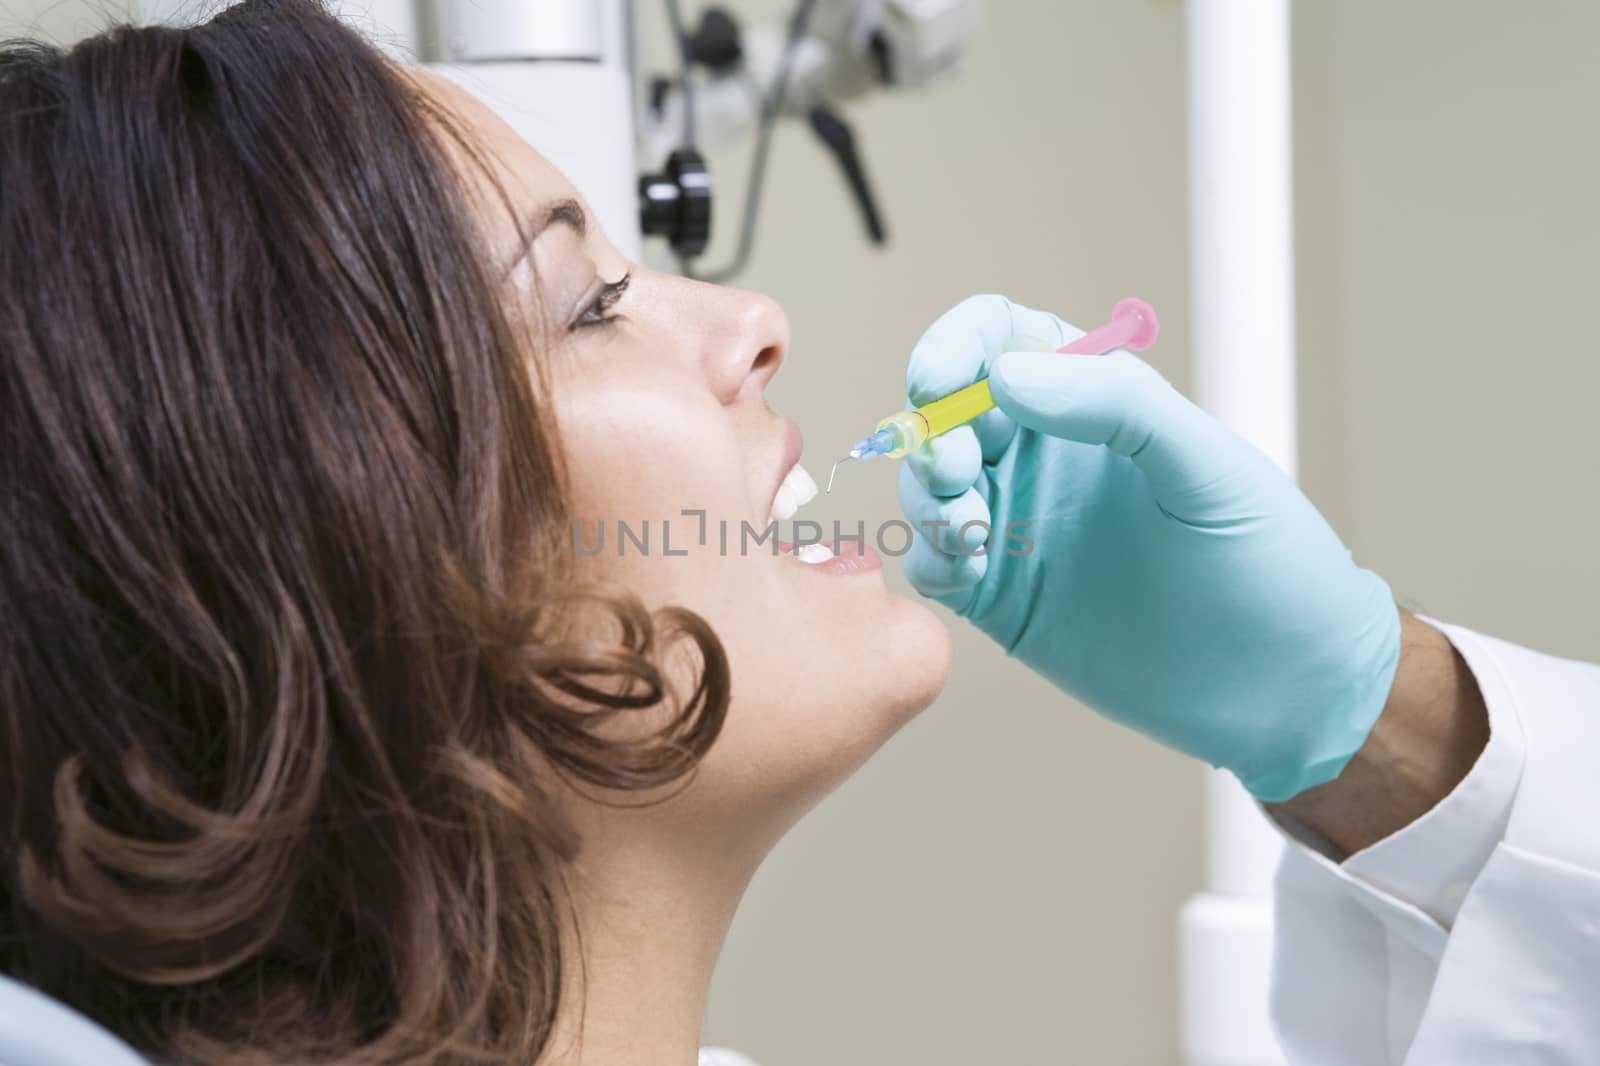 Dentist injecting female patient's teeth in clinic by moodboard